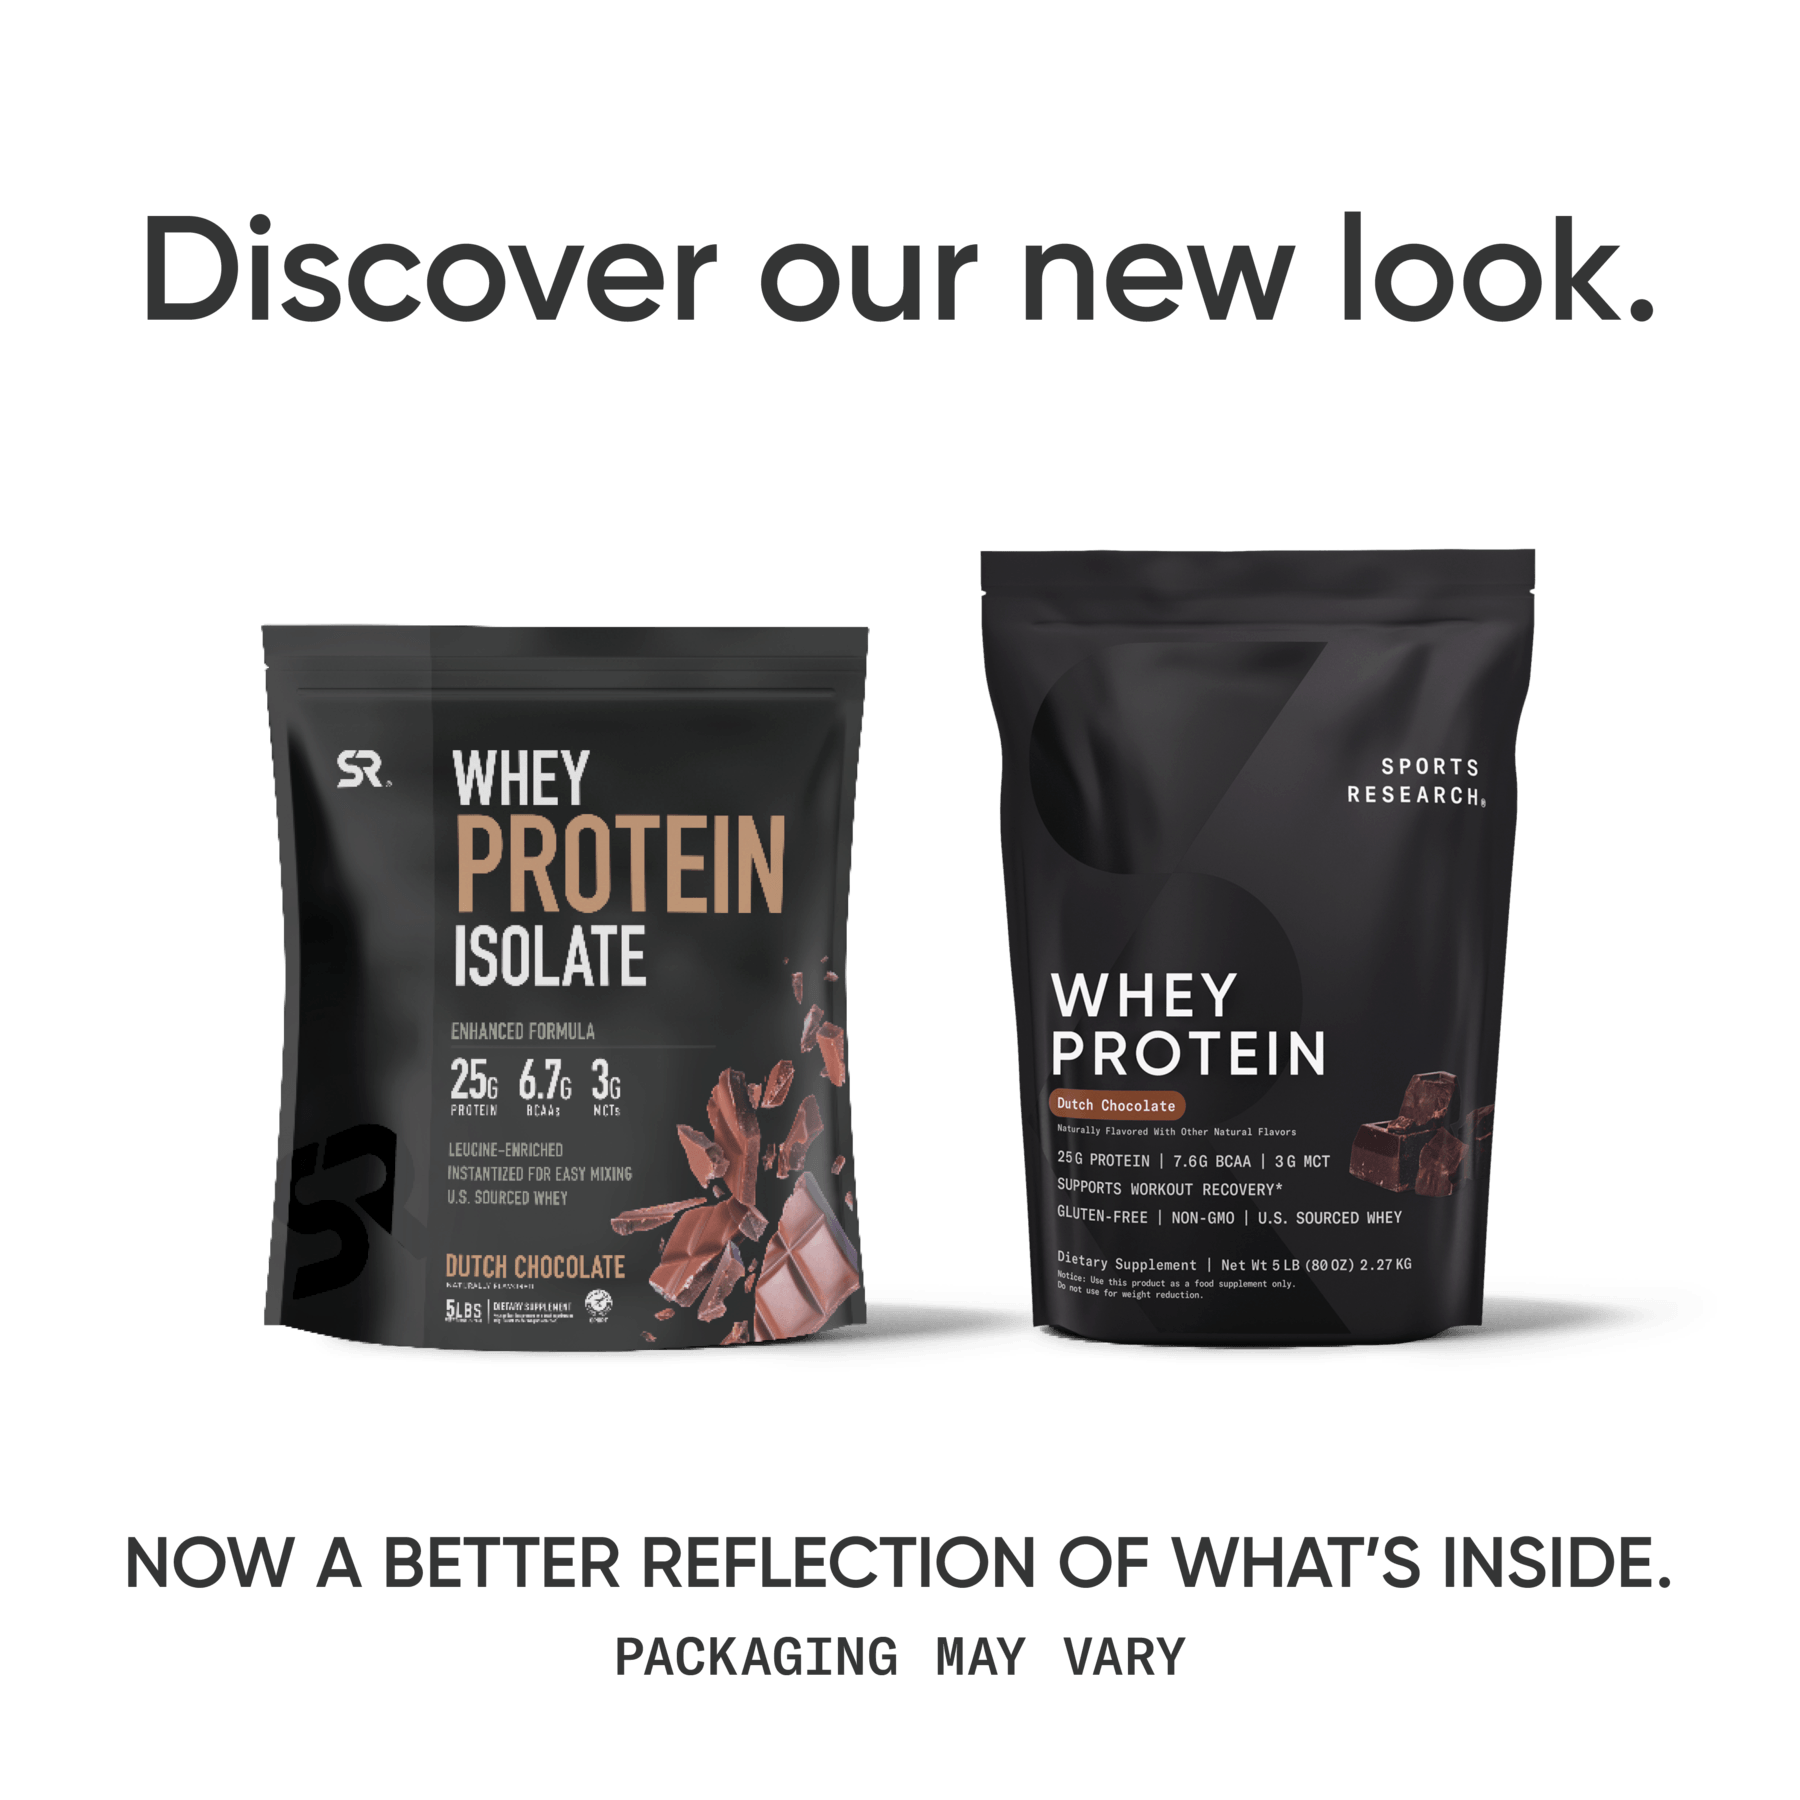 Sports Research Whey Protein Isolate now better reflection of what's inside.